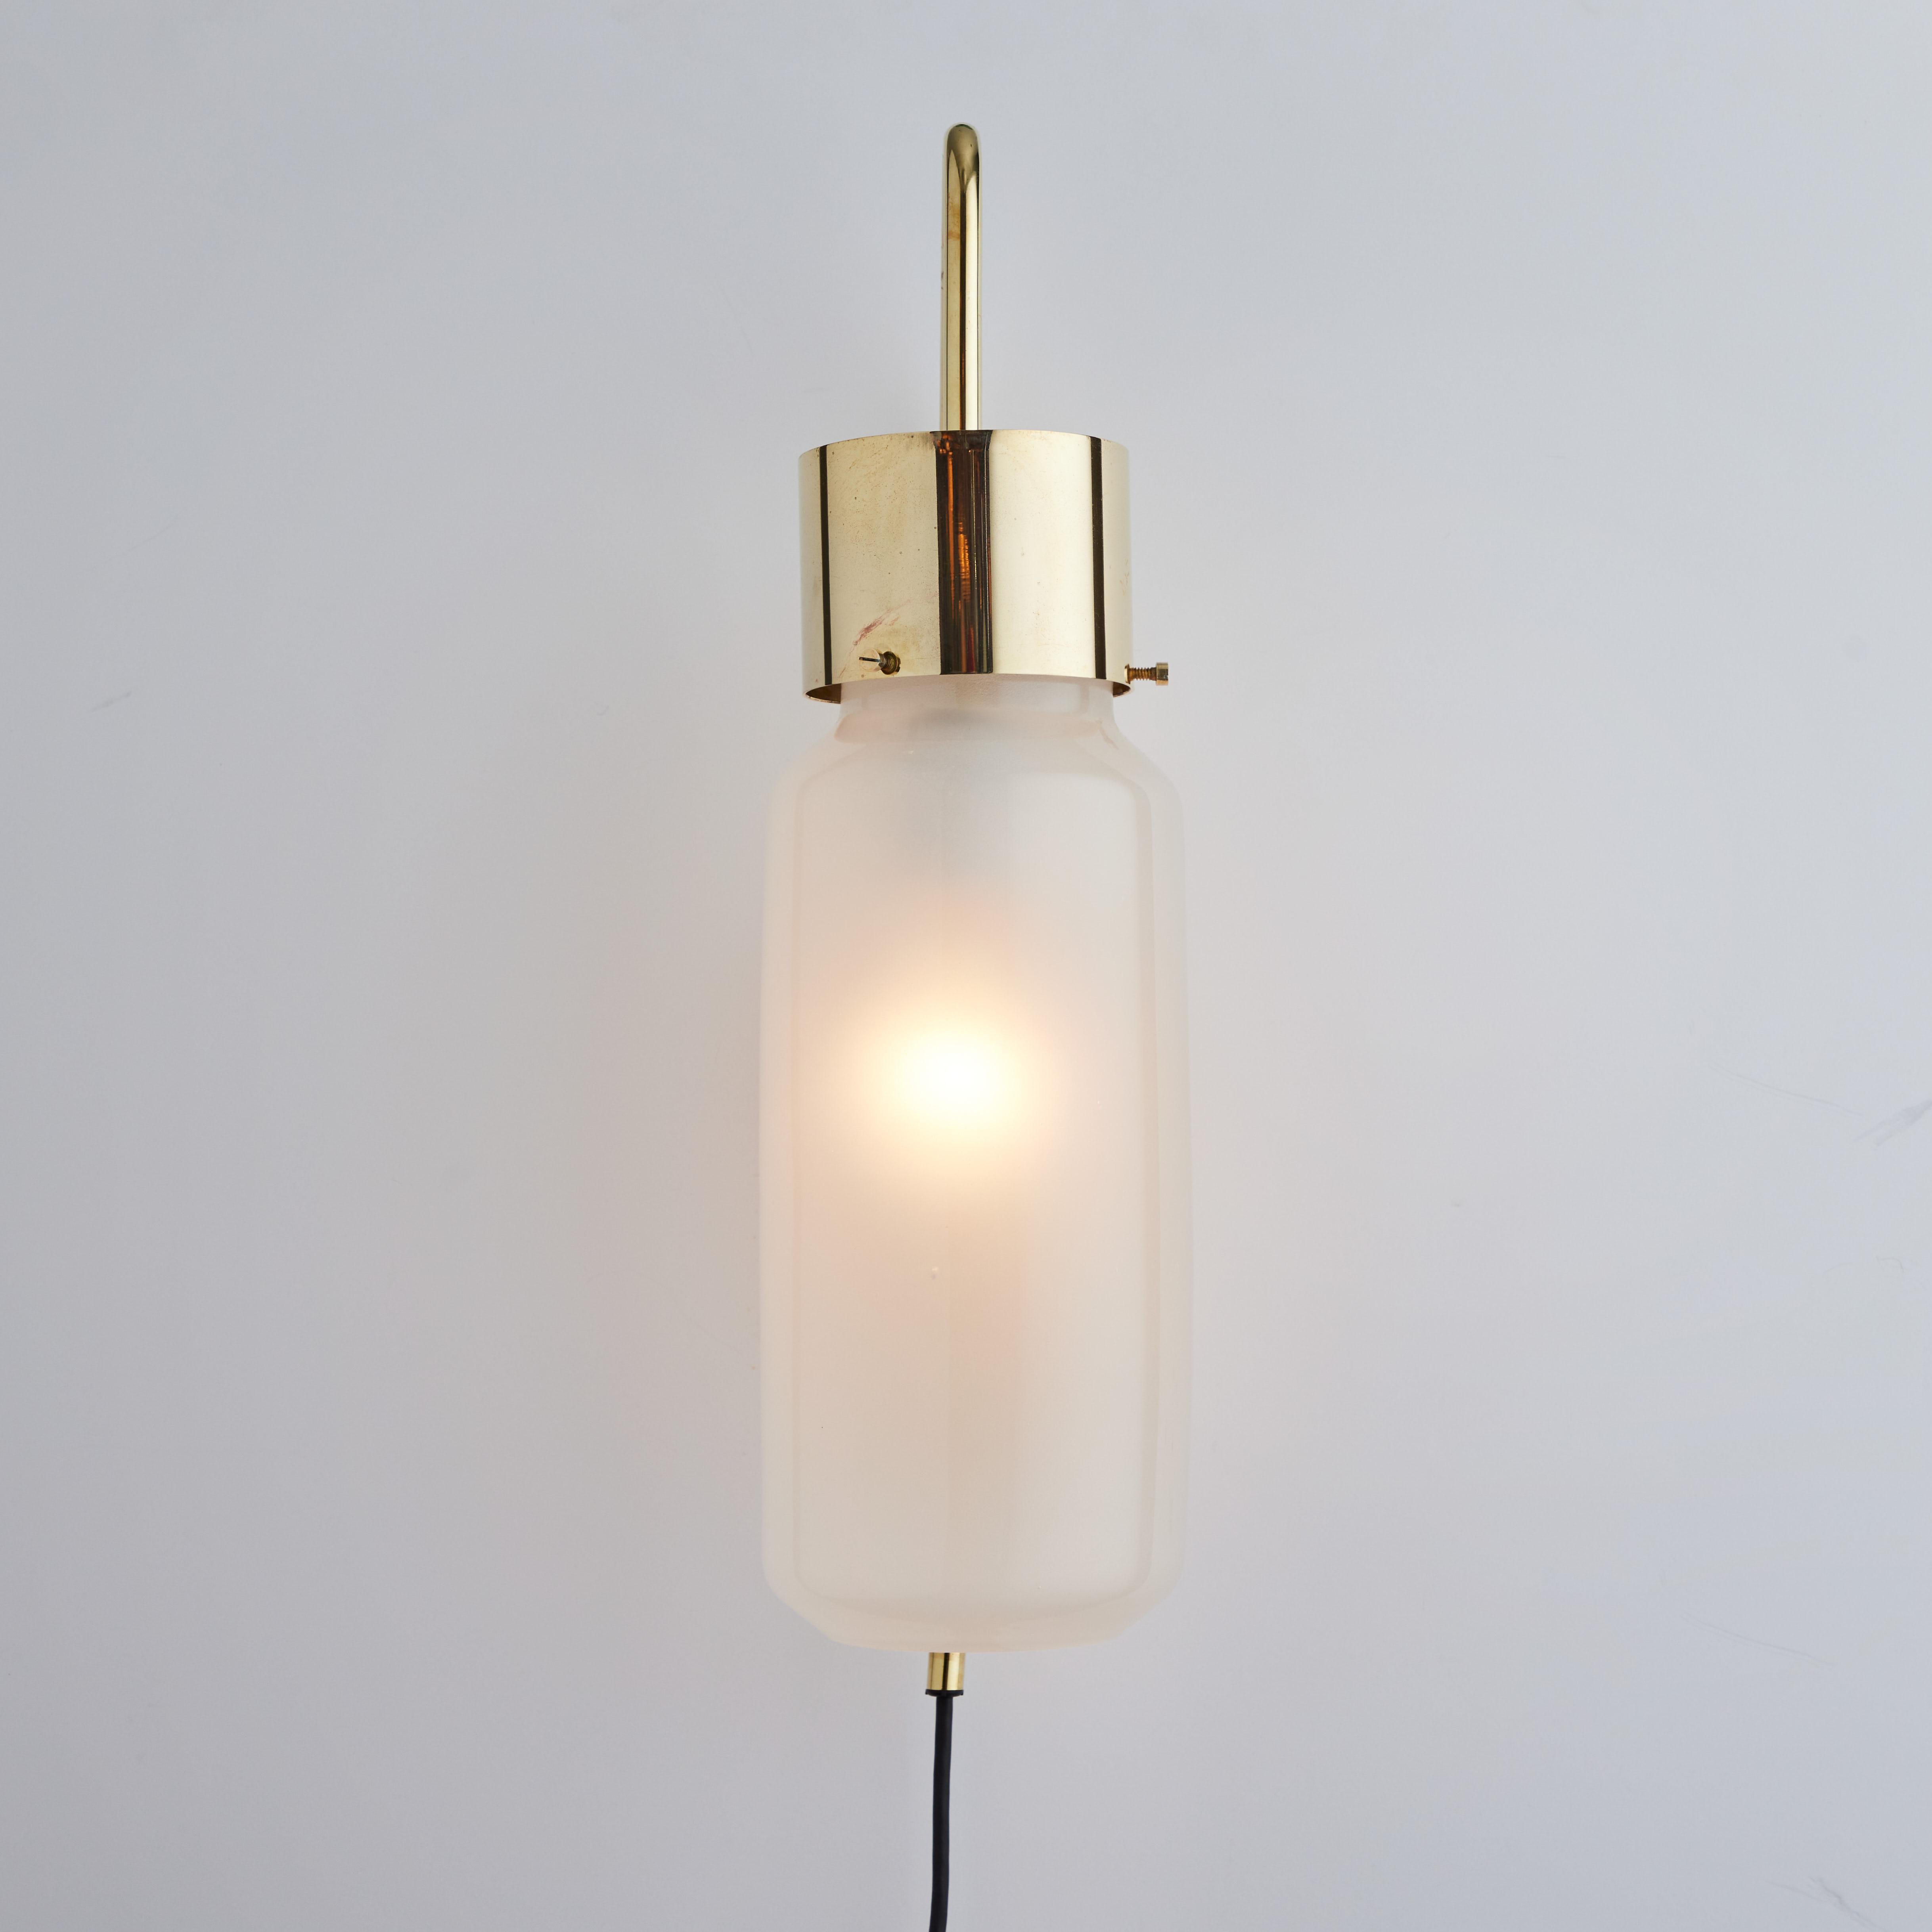 Large 1950s Luigi Caccia Dominioni 'LP 10' wall light with Azucena Stamp. An exceptionally rare and beautifully sculptural wall lamp executed in architectural brass and opaline glass, Italy, circa 1958. An incredibly refined and timelessly modern